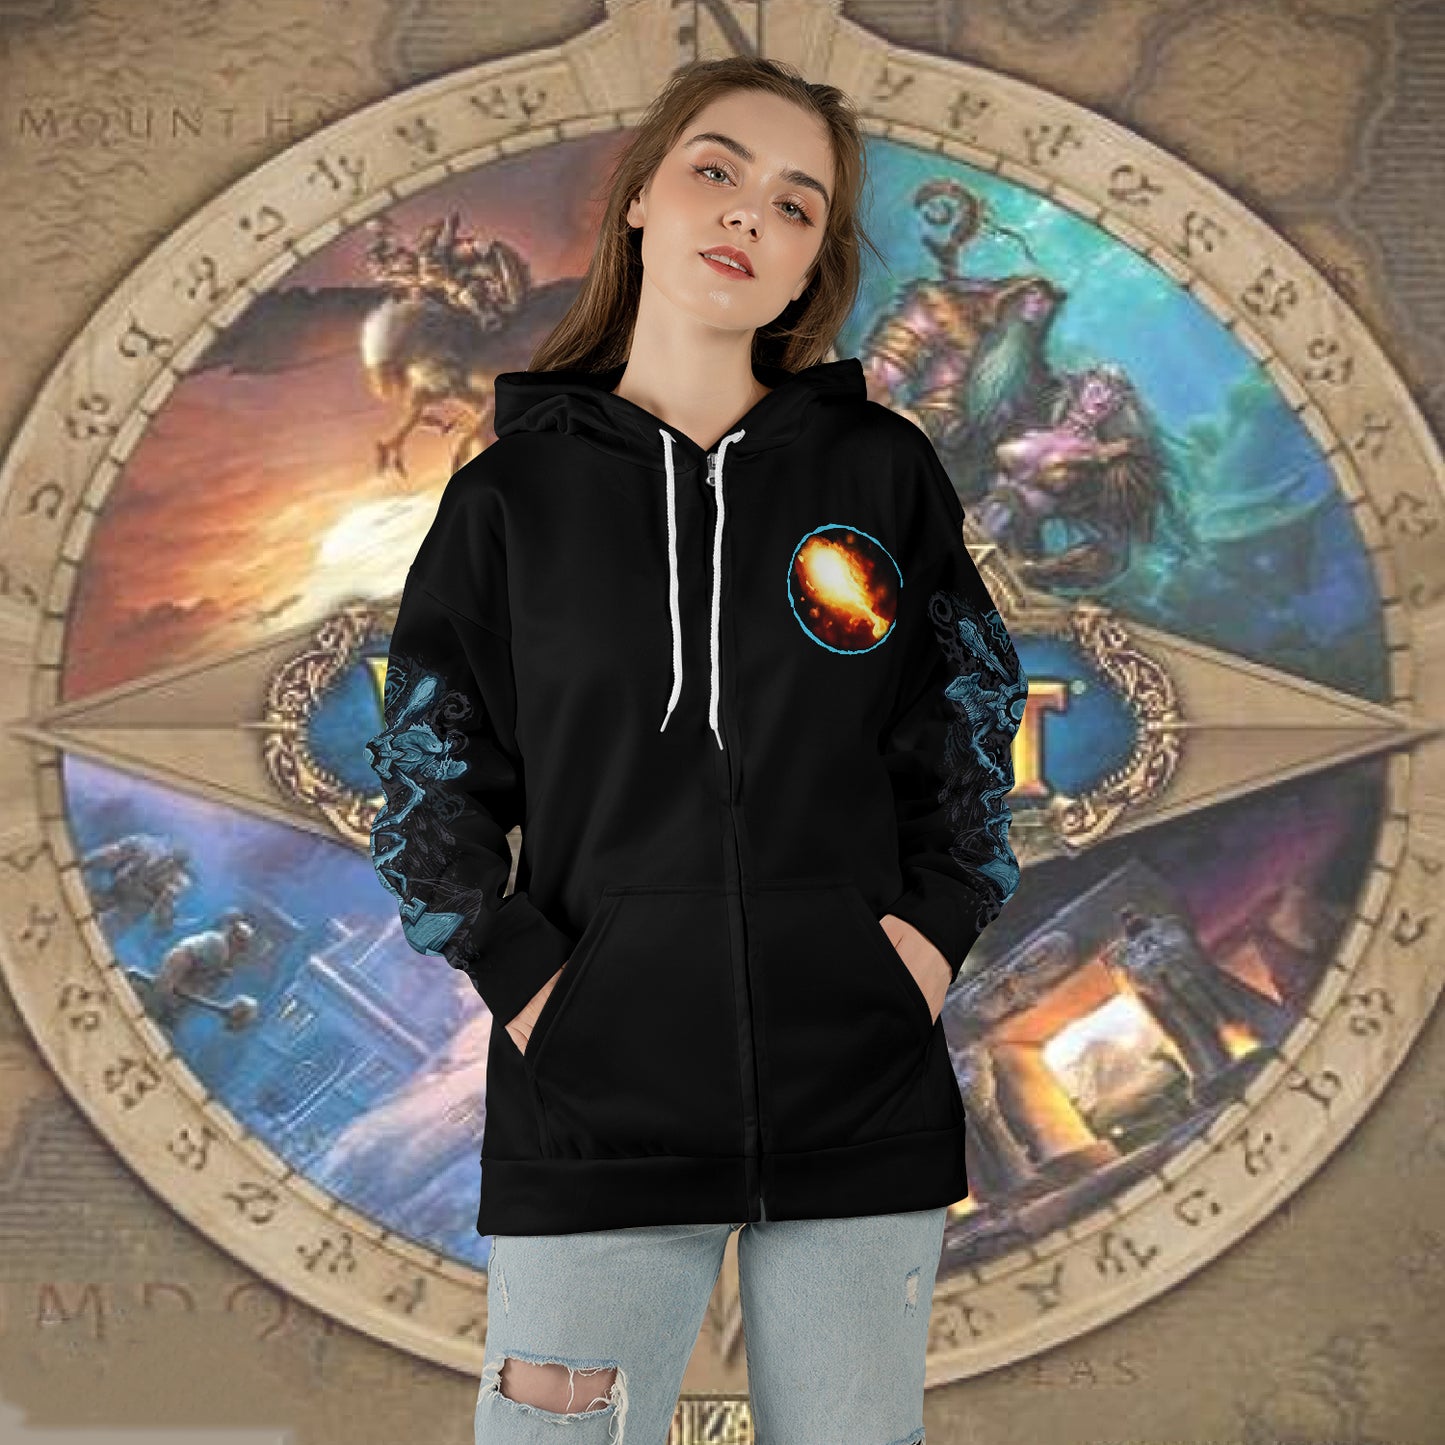 WoW Class Fire Mage Guide V1 All-over Print Zip Hoodie